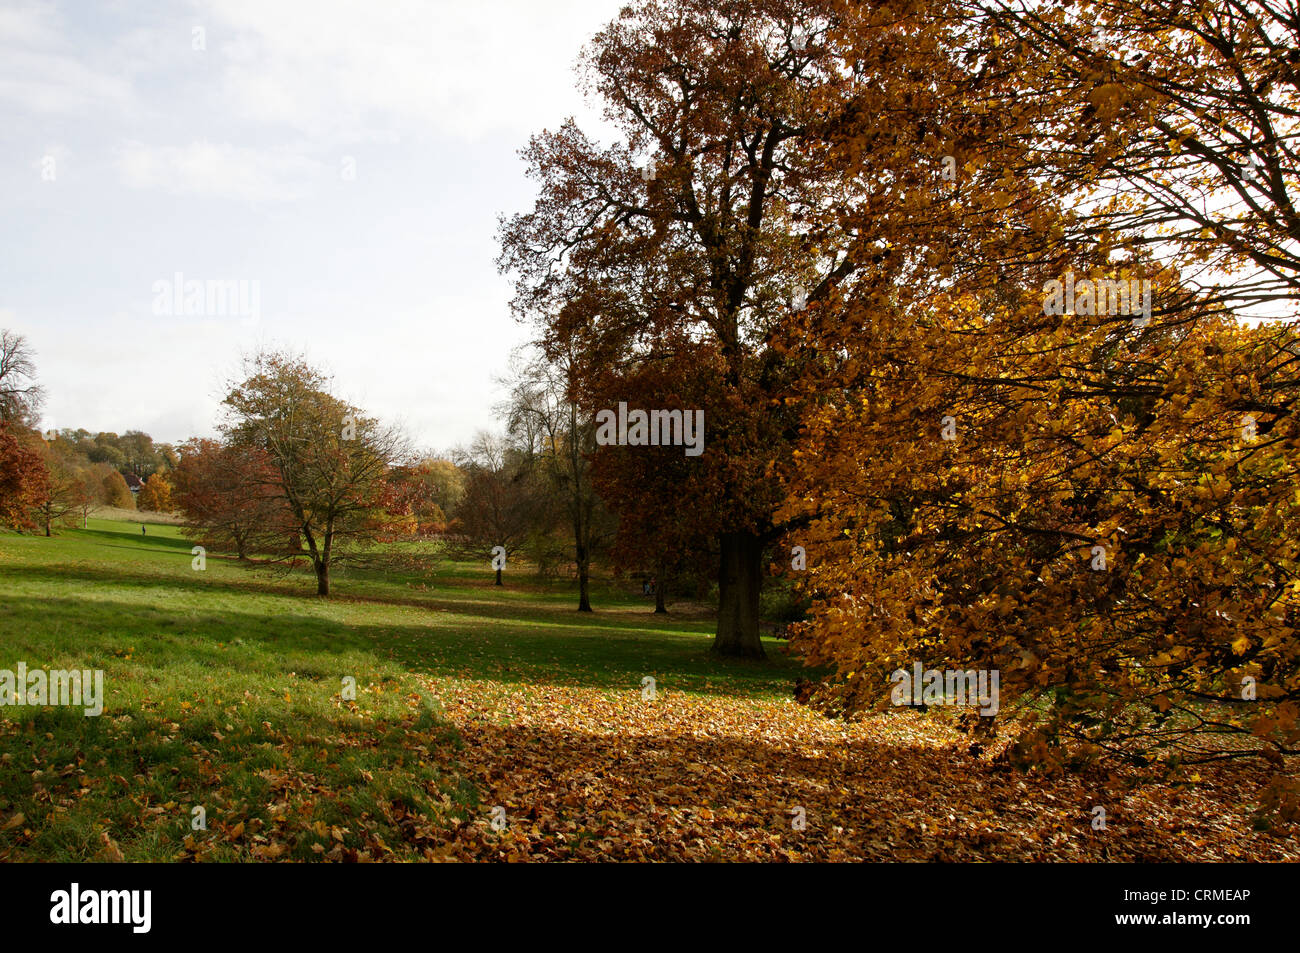 Trees in a park in Autumn Stock Photo